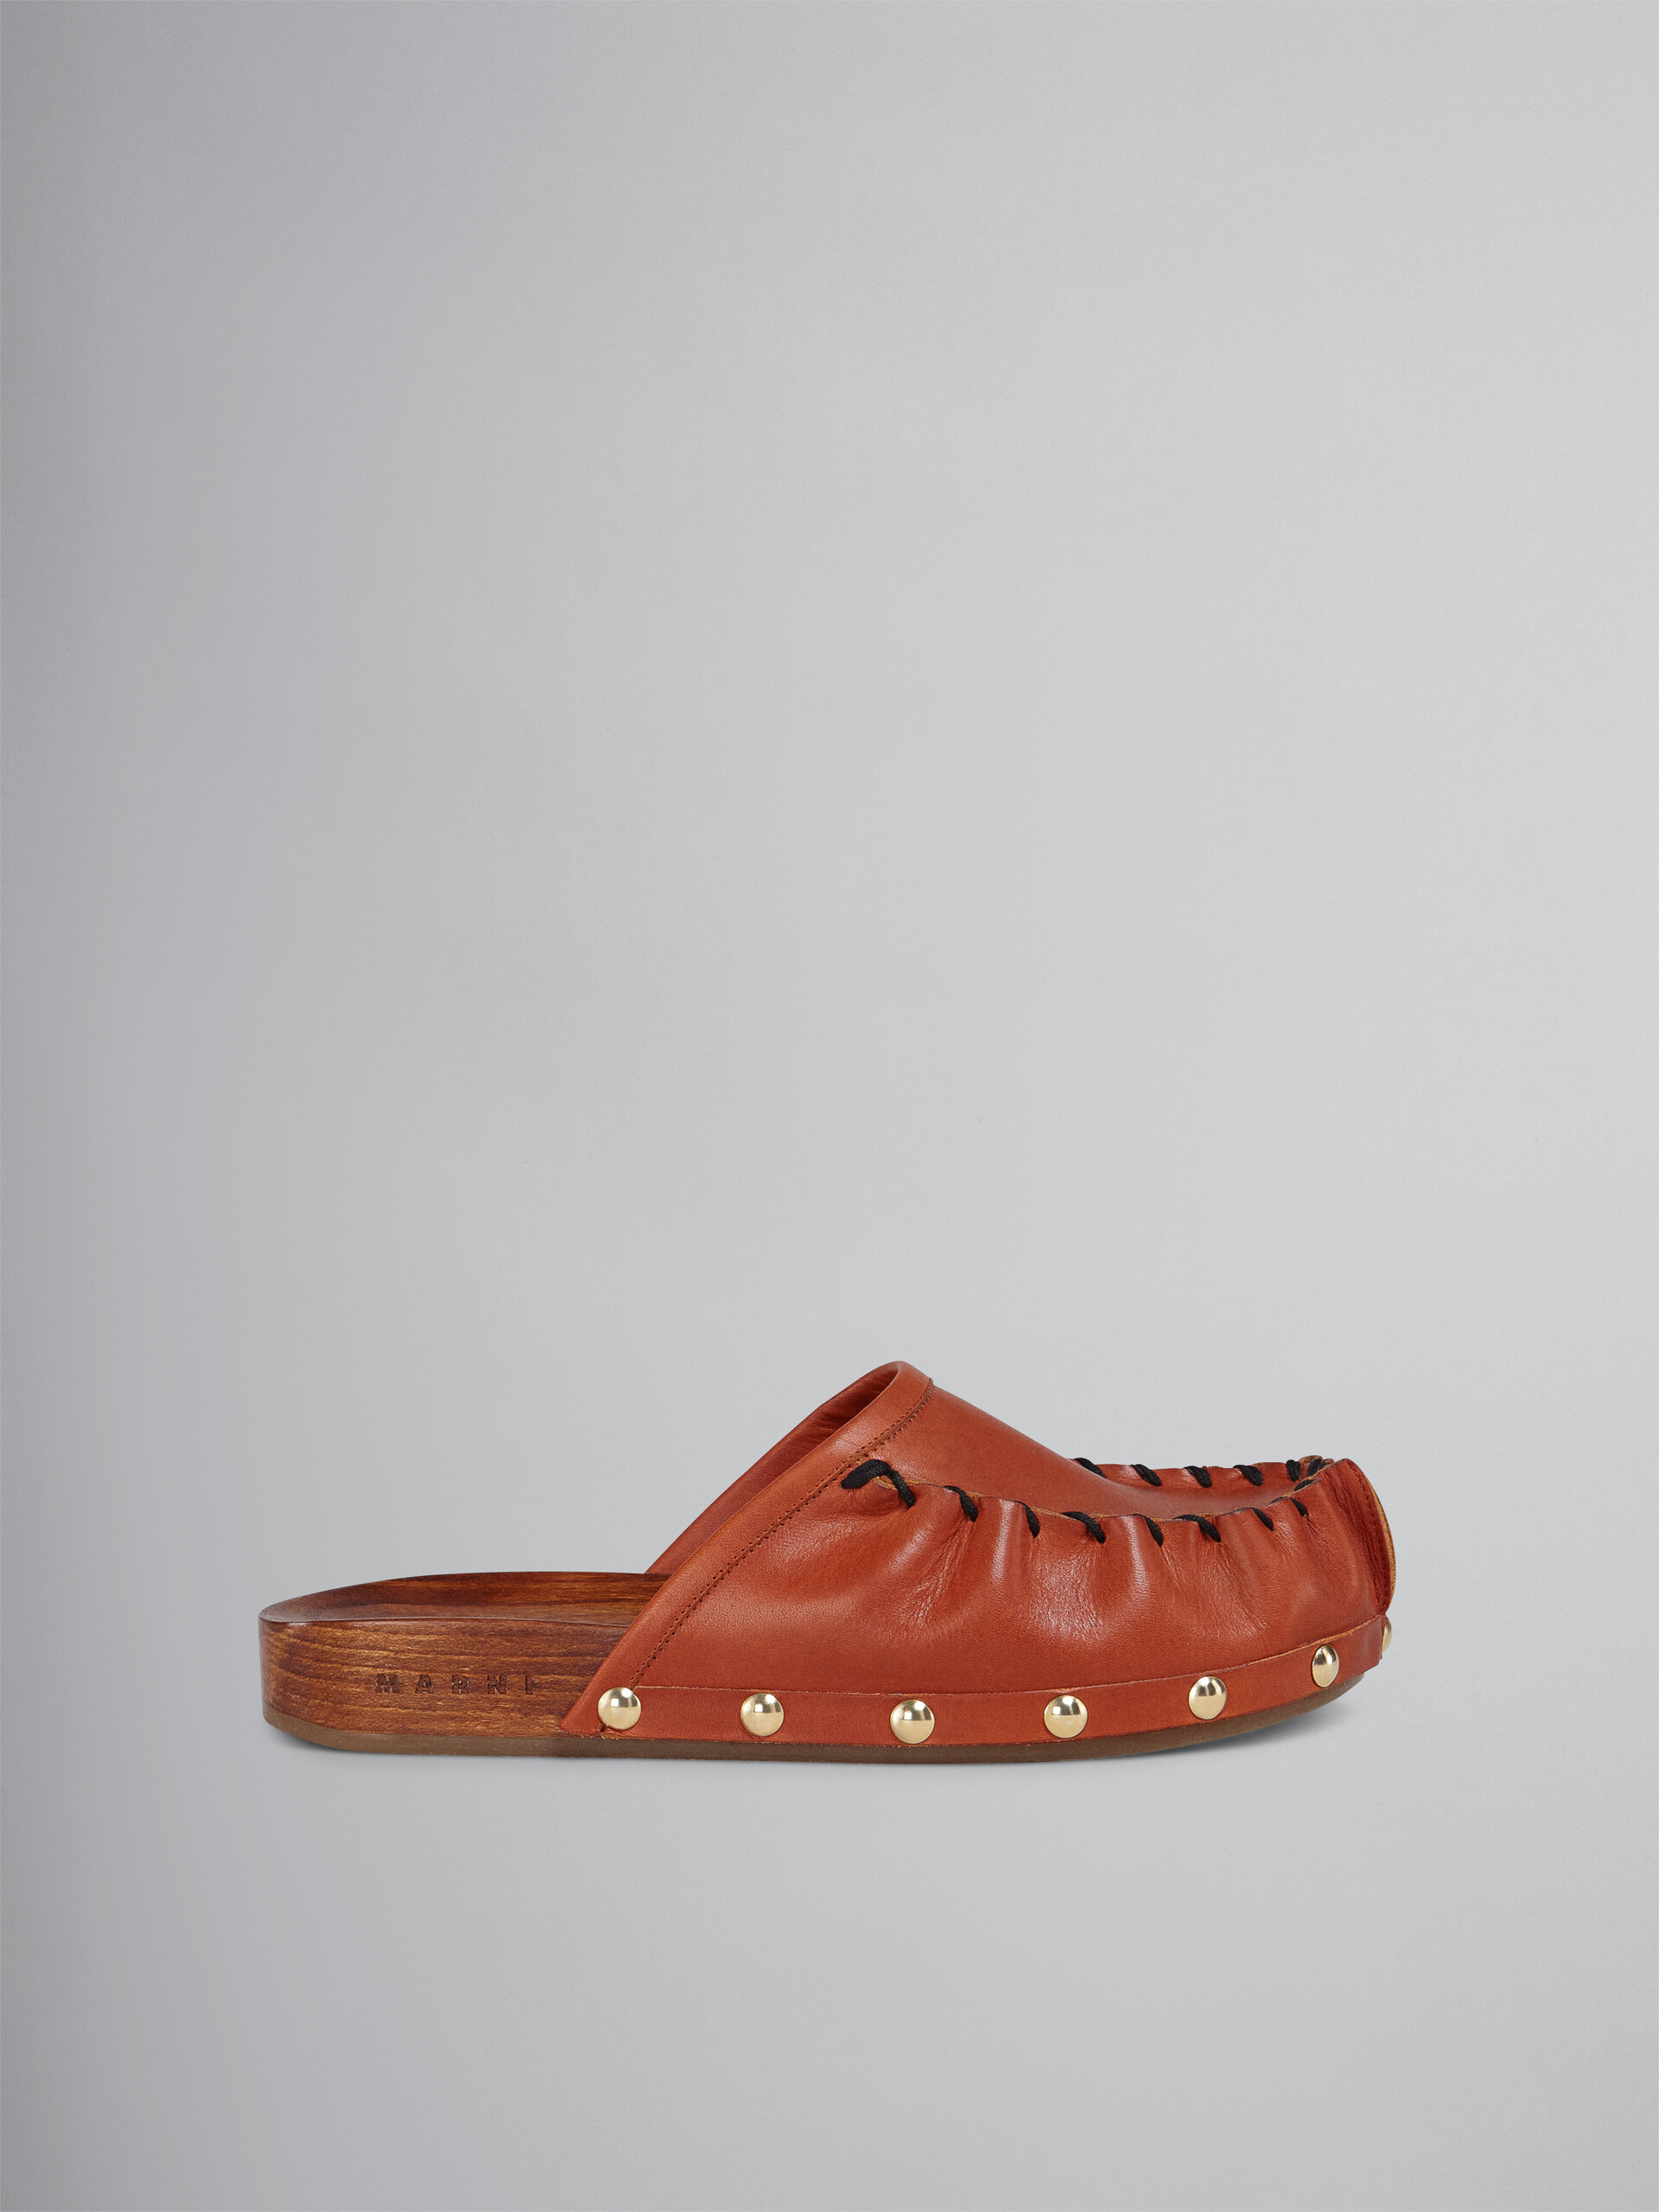 Vegetable-tanned leather and wood clog - Clogs - Image 1